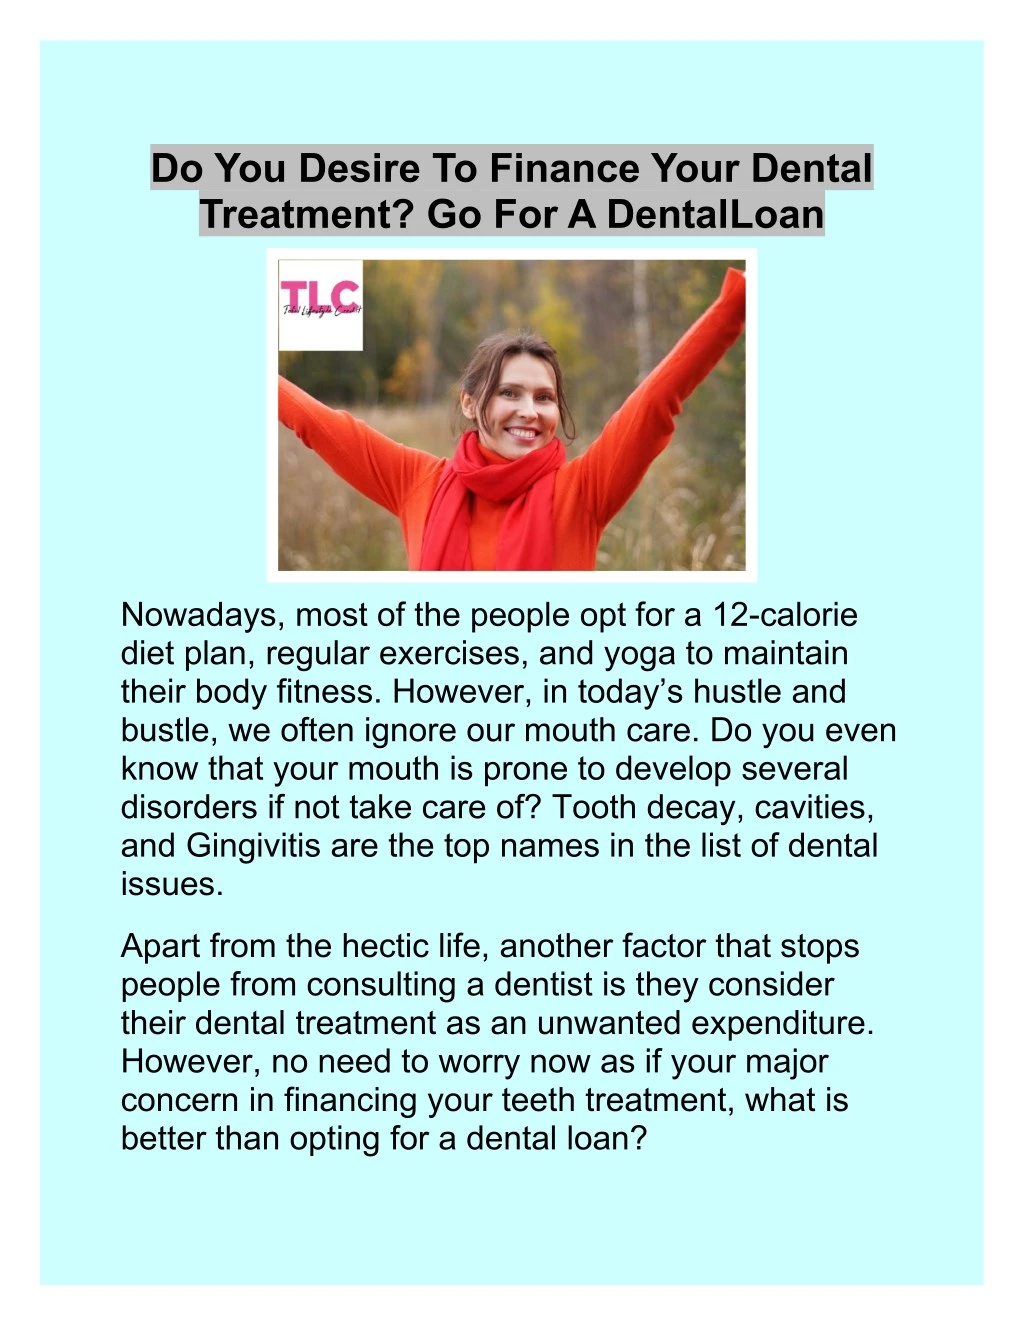 do you desire to finance your dental treatment